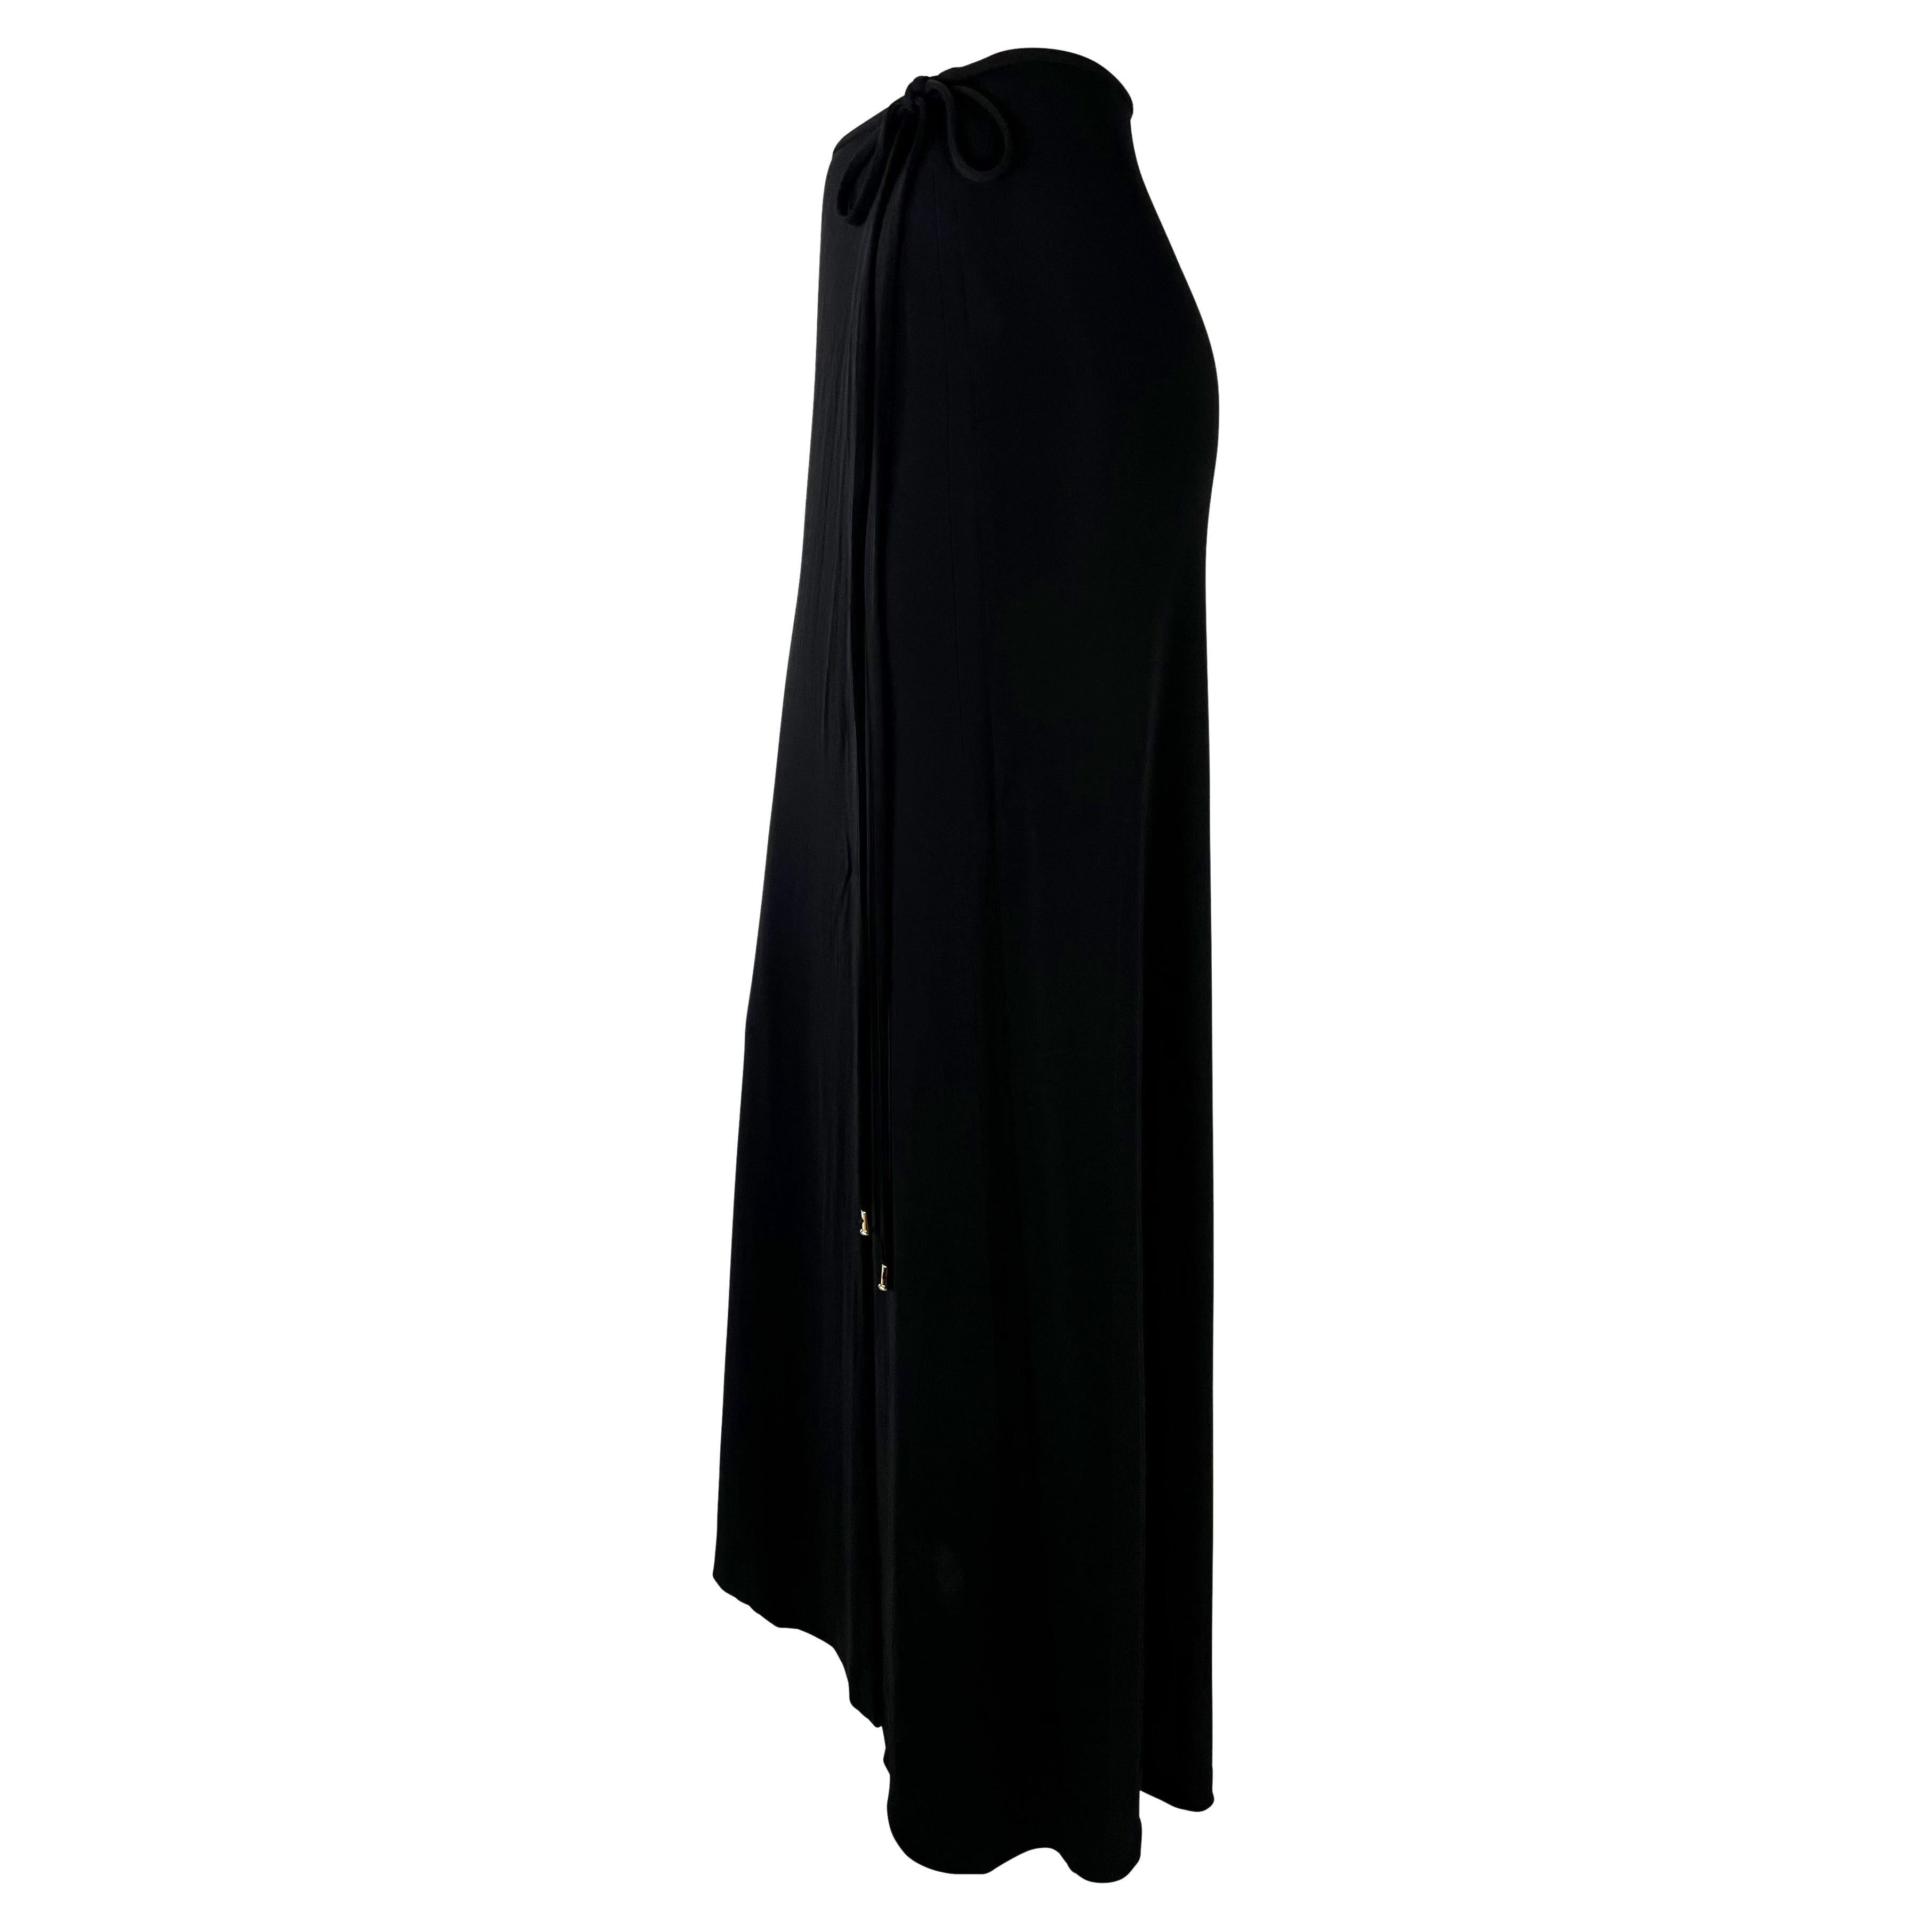 Presenting a chic black wrap maxi skirt designed by Tom Ford for Gucci's Spring/Summer 1997 collection. Constructed in 100% viscose, this stretchy skirt beautifully hugs the wearer. Gold-toned G logo hardware accents the tie closure for a subtle